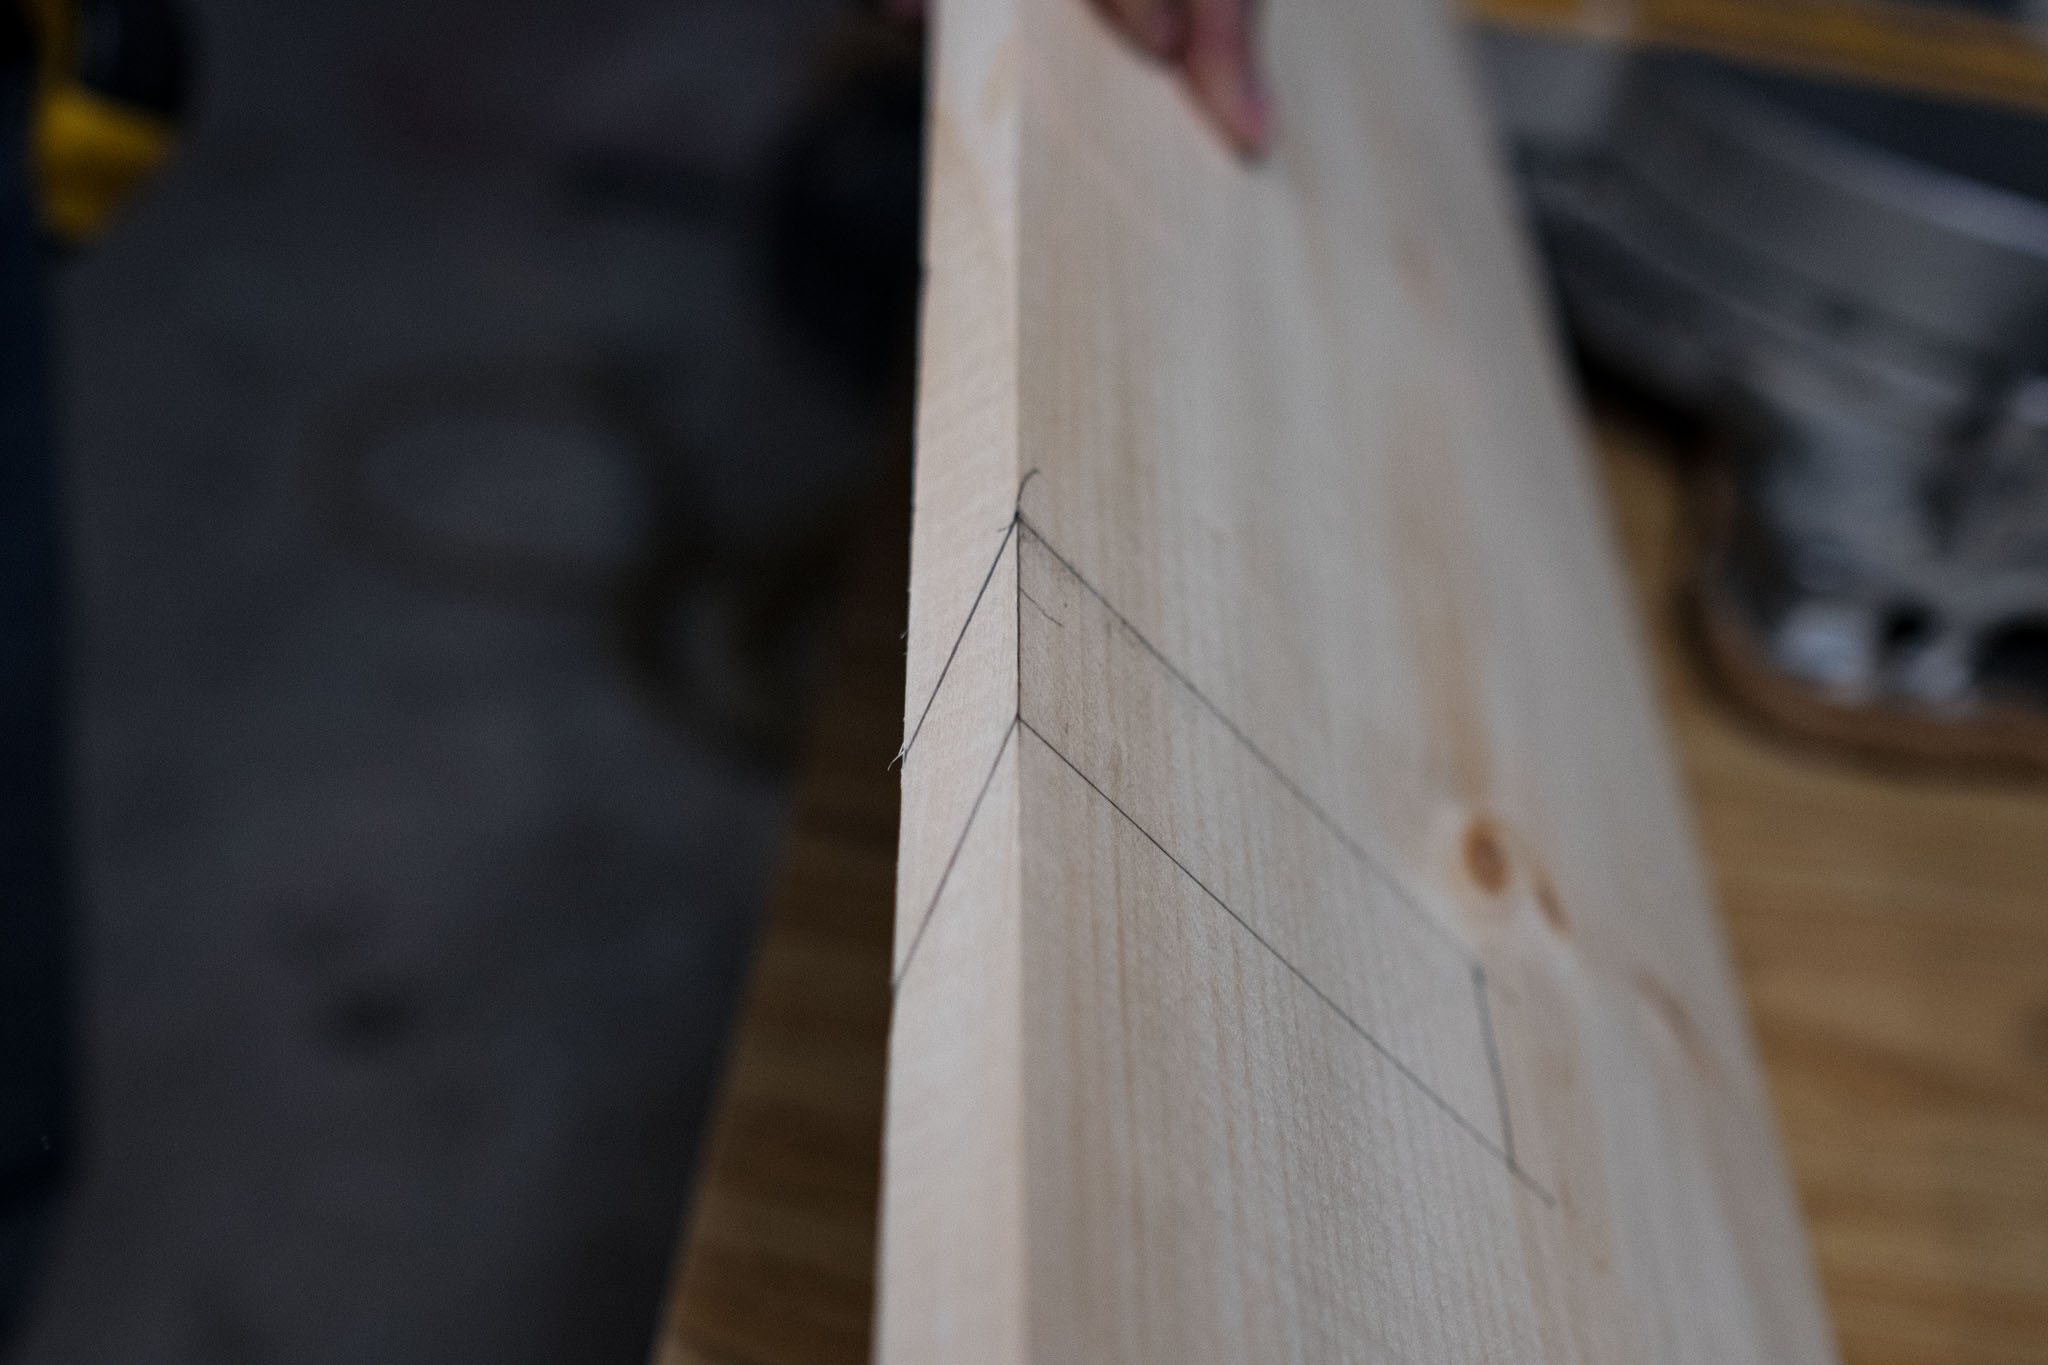 The process behind my minimal wood shelf project